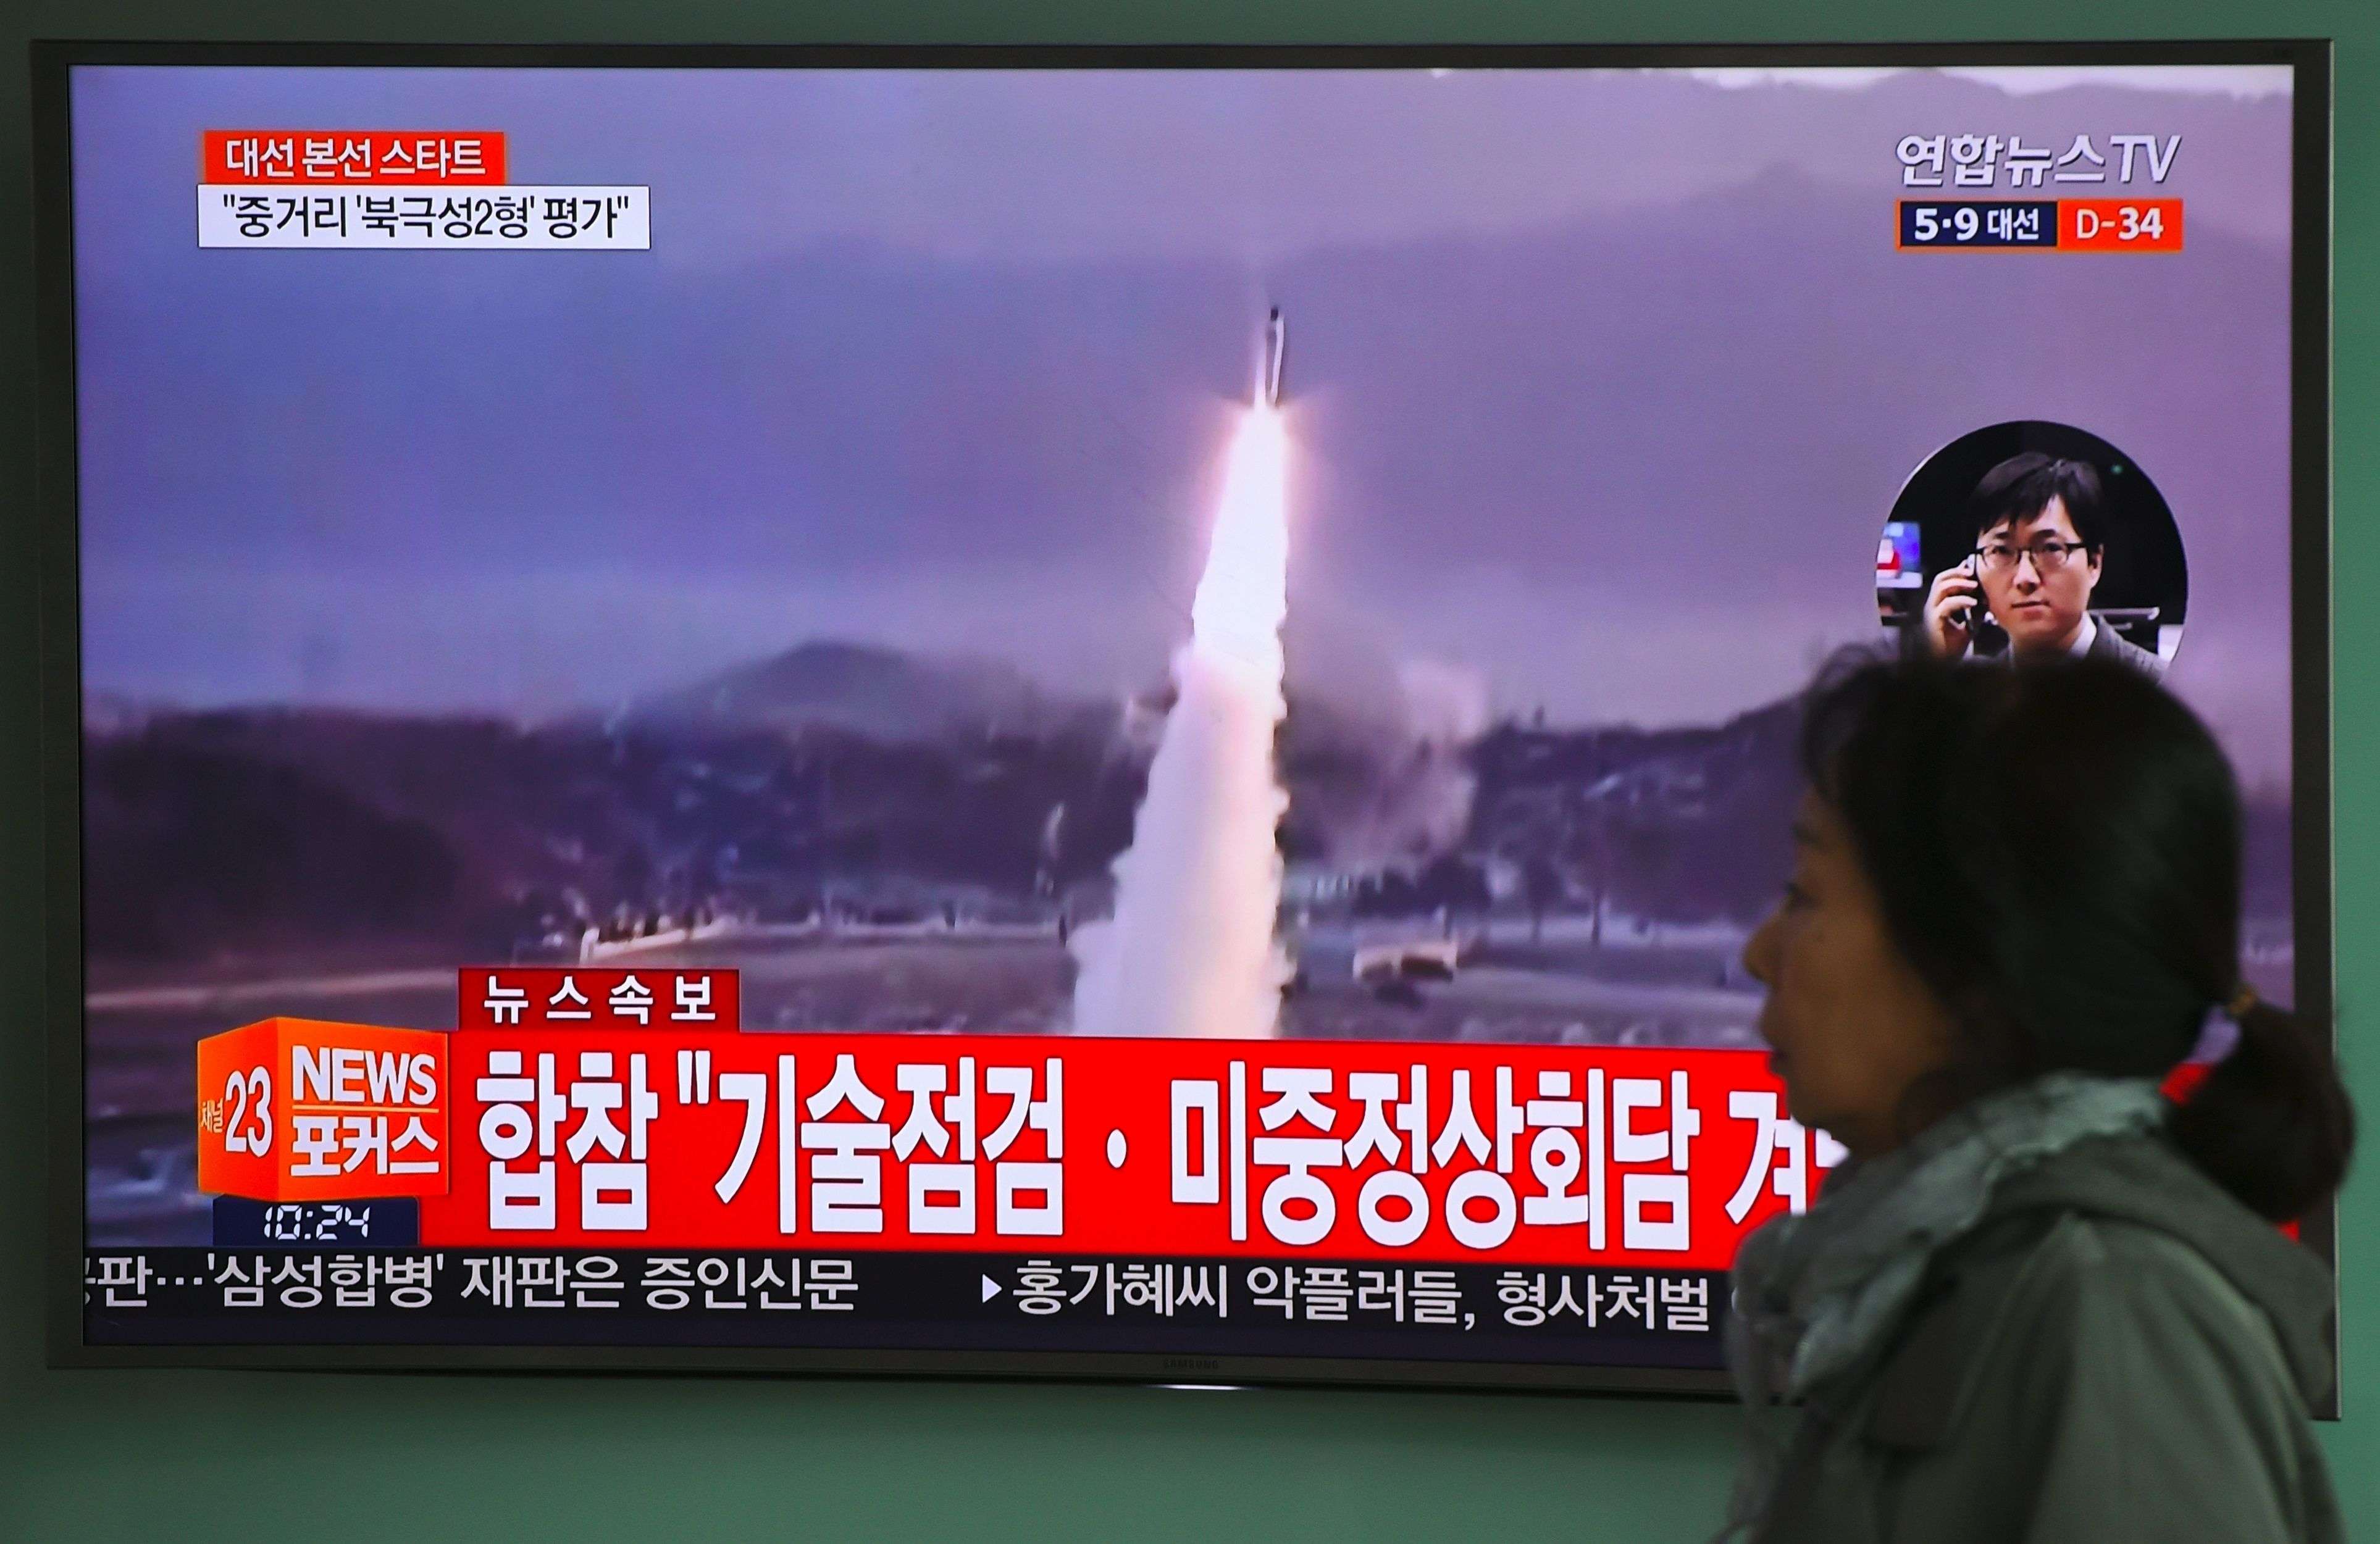 A woman walks past a television screen in Seoul, South Korea, showing file footage of a North Korean missile launch on Wednesday. The North fired a ballistic missile into the Sea of Japan that day, just ahead of the China-US summit in Florida. Photo: AFP